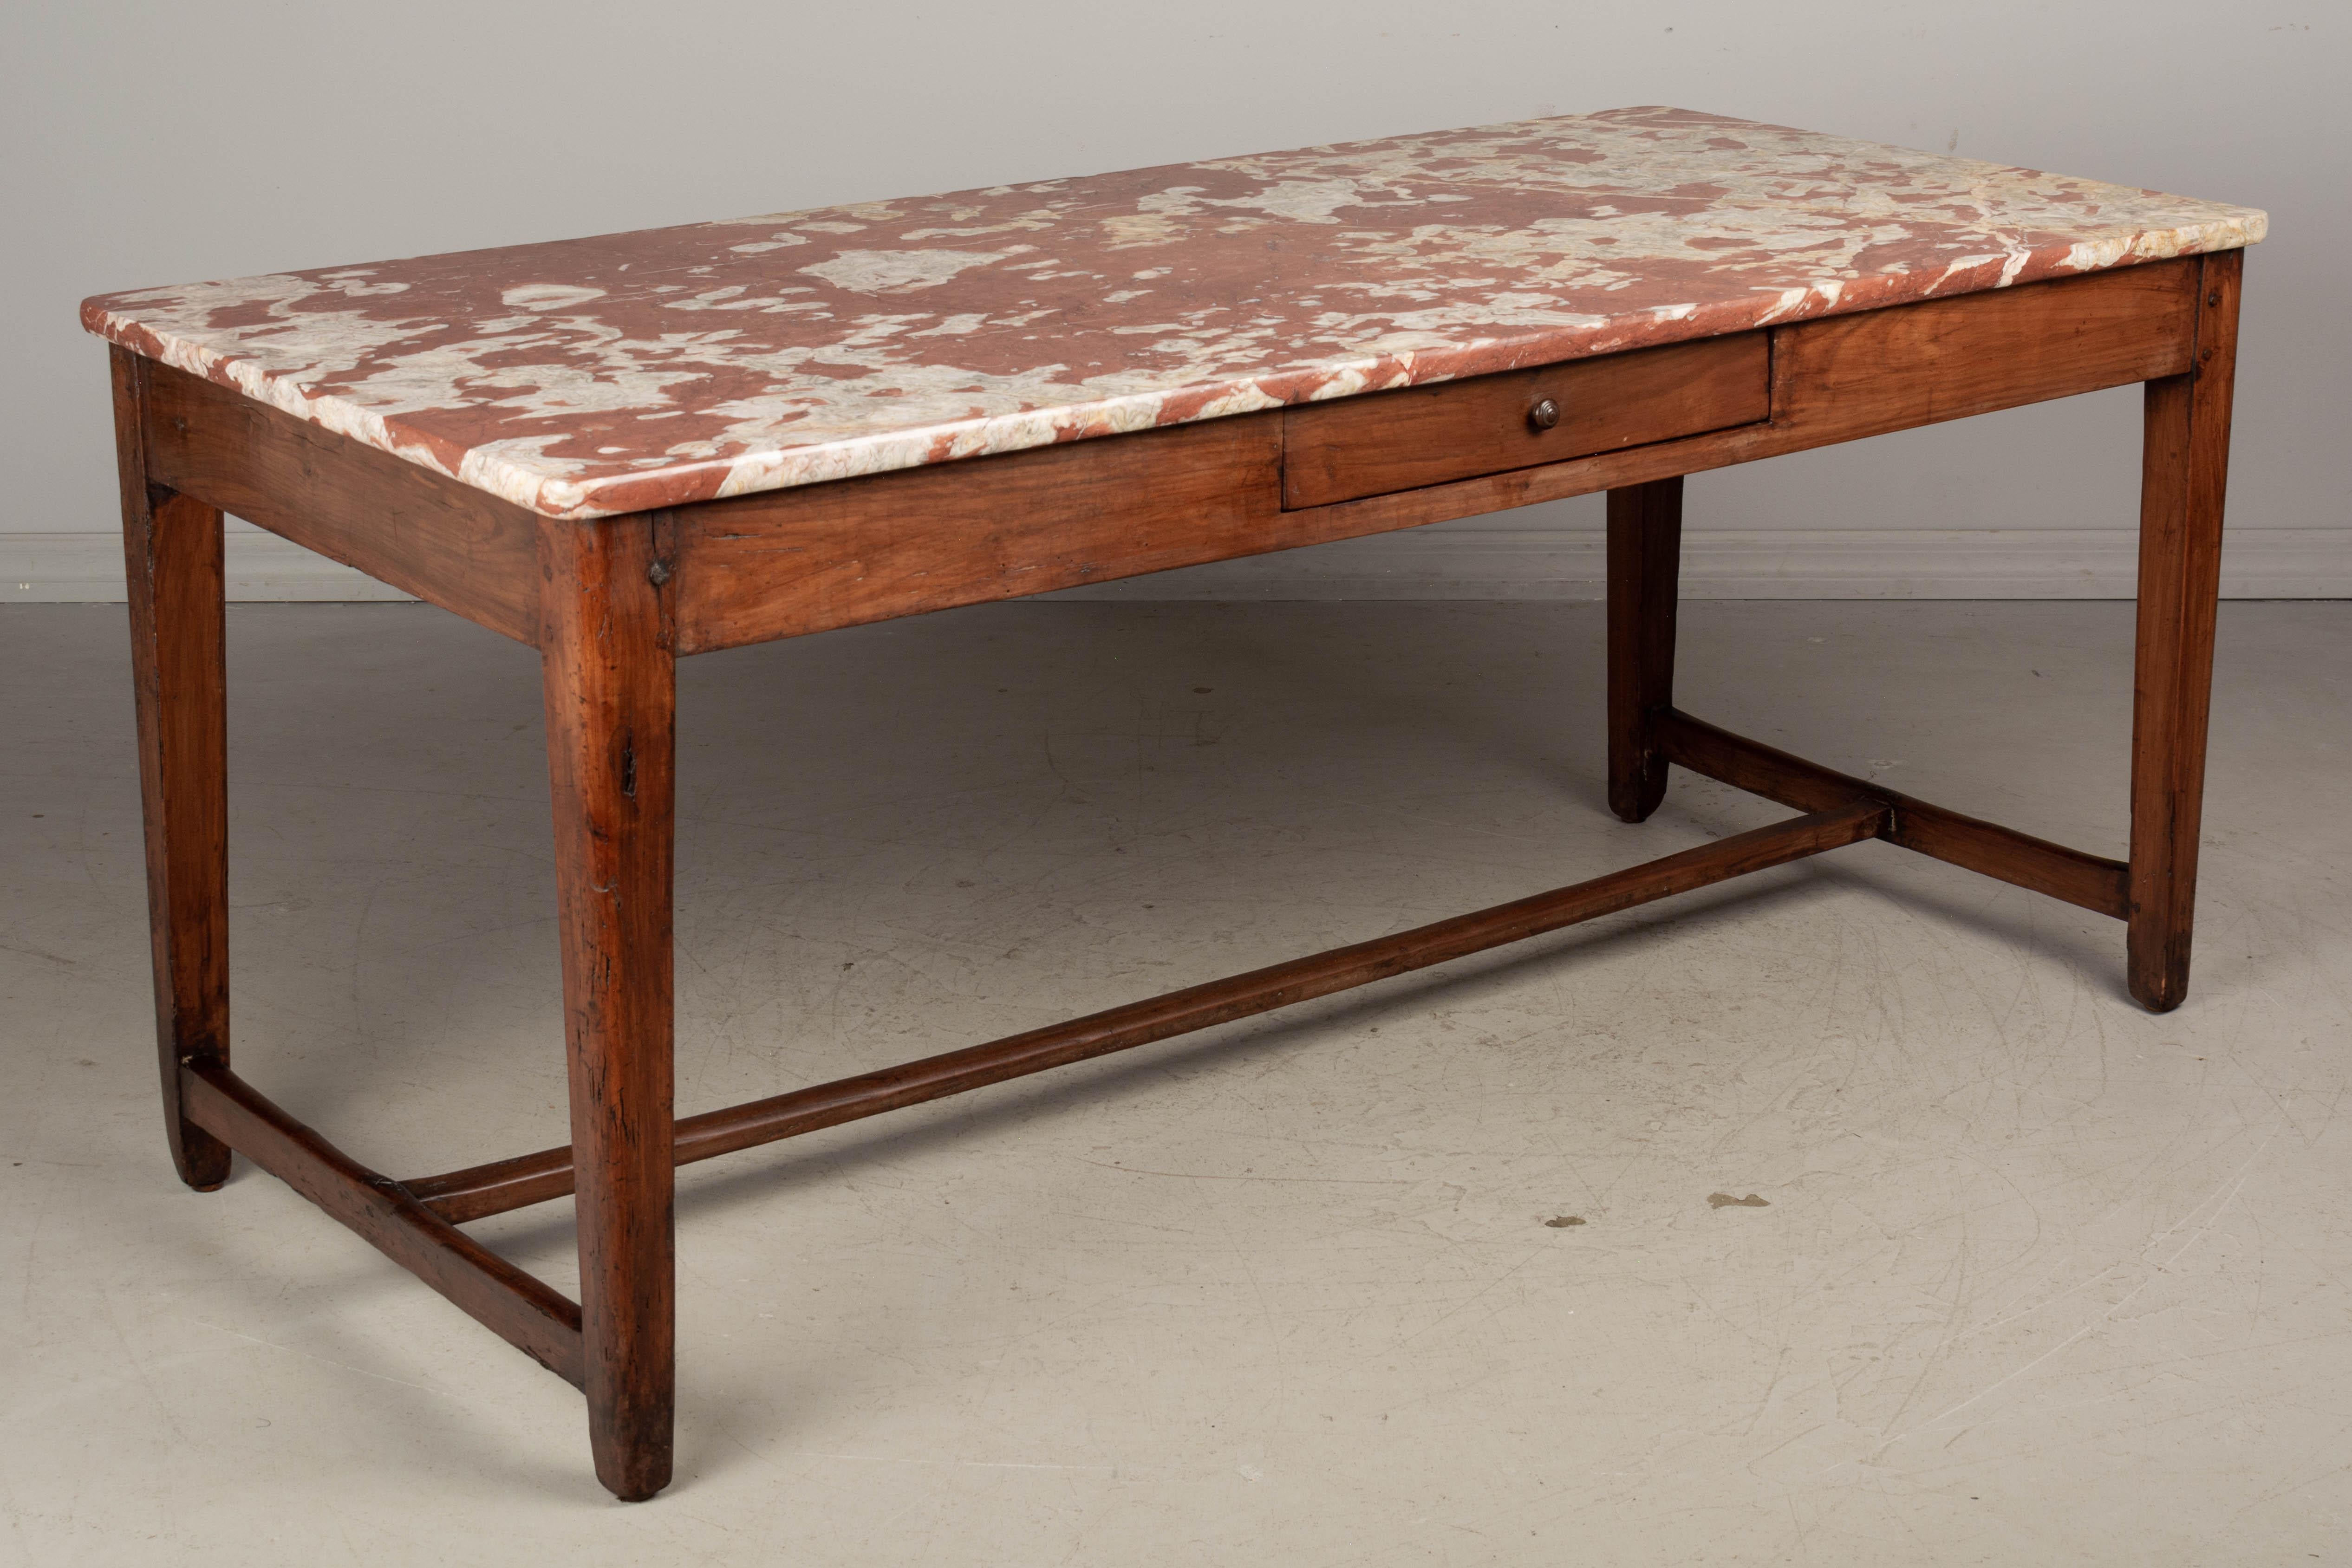 A 19th century French table made of solid cherry wood with beautiful Rouge Royale marble top. Sturdy pegged construction with tapered legs and stretcher. Two dovetailed drawers with divided interior. Waxed finish. This farm table sits lower than